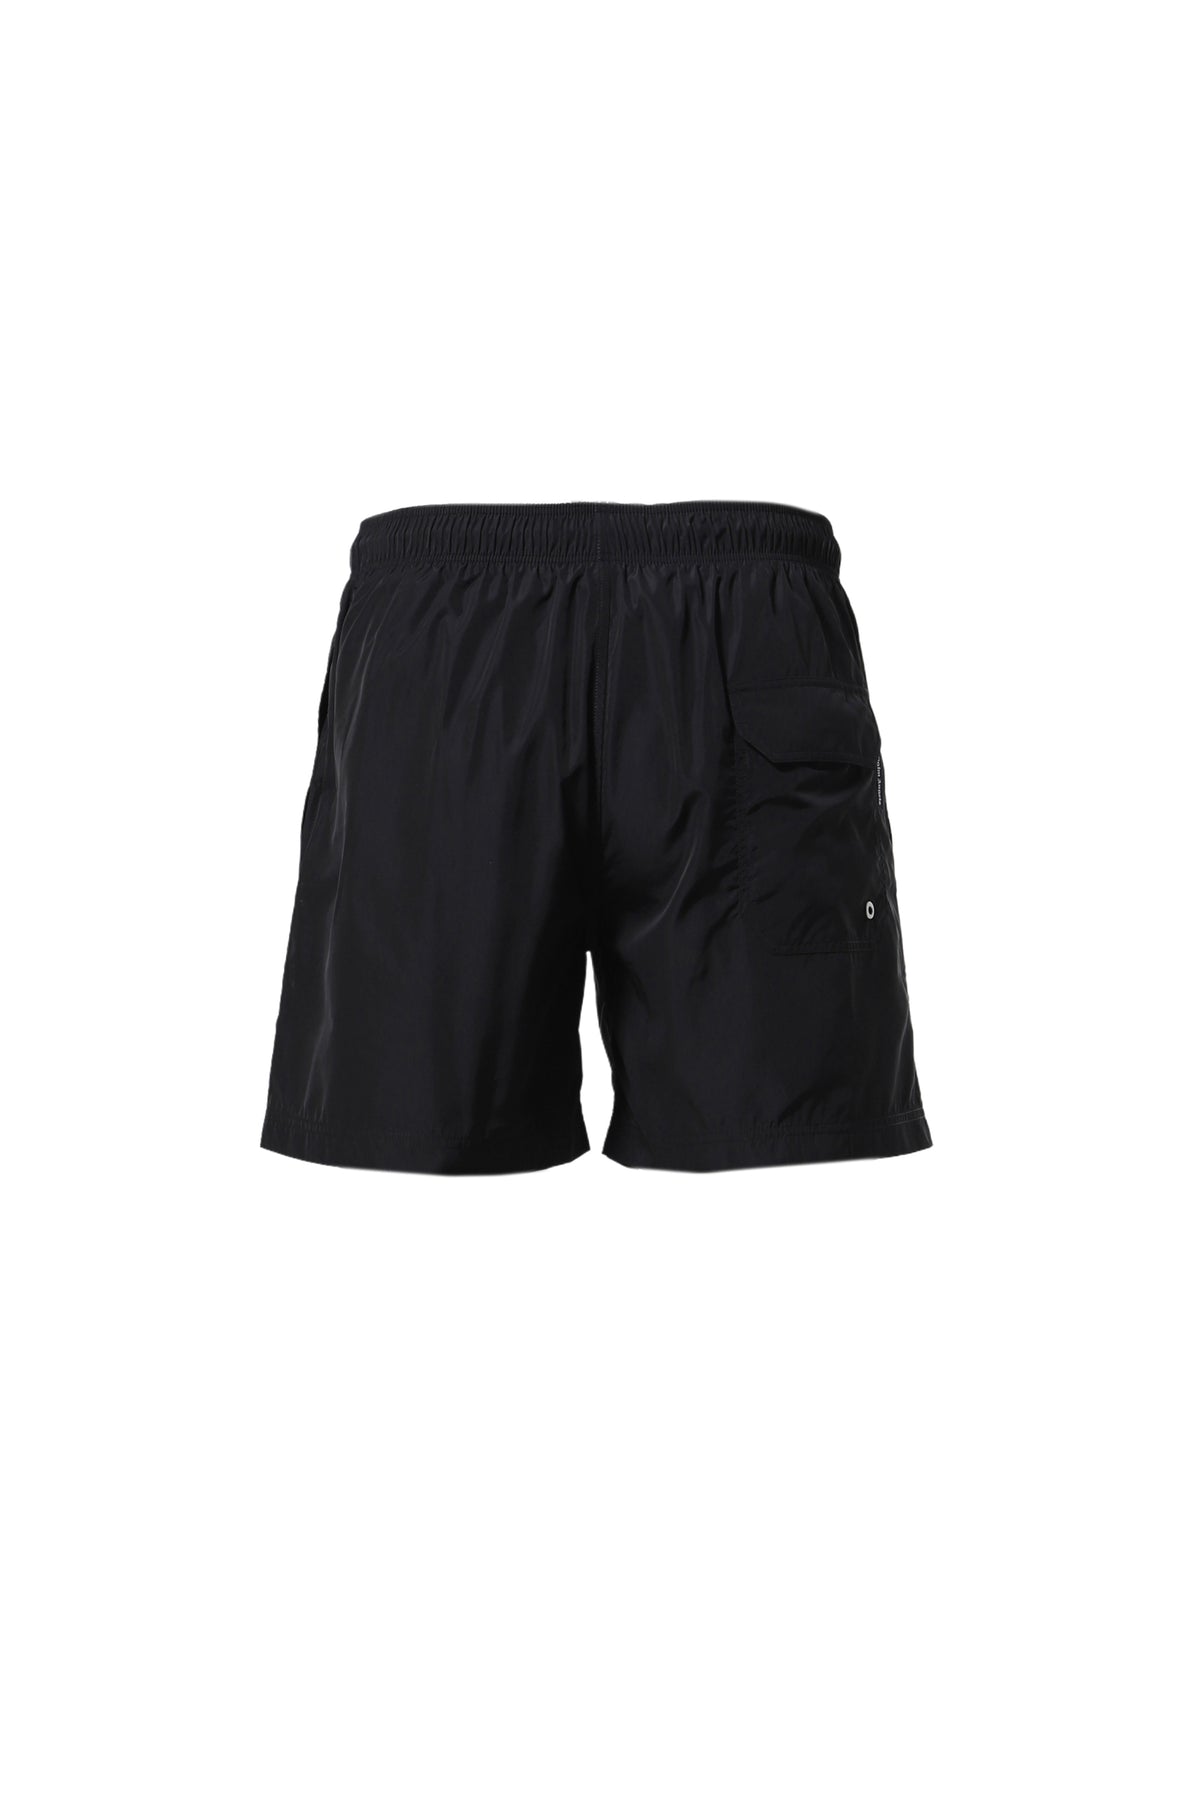 PA CITY SWIMSHORTS / BLK RED